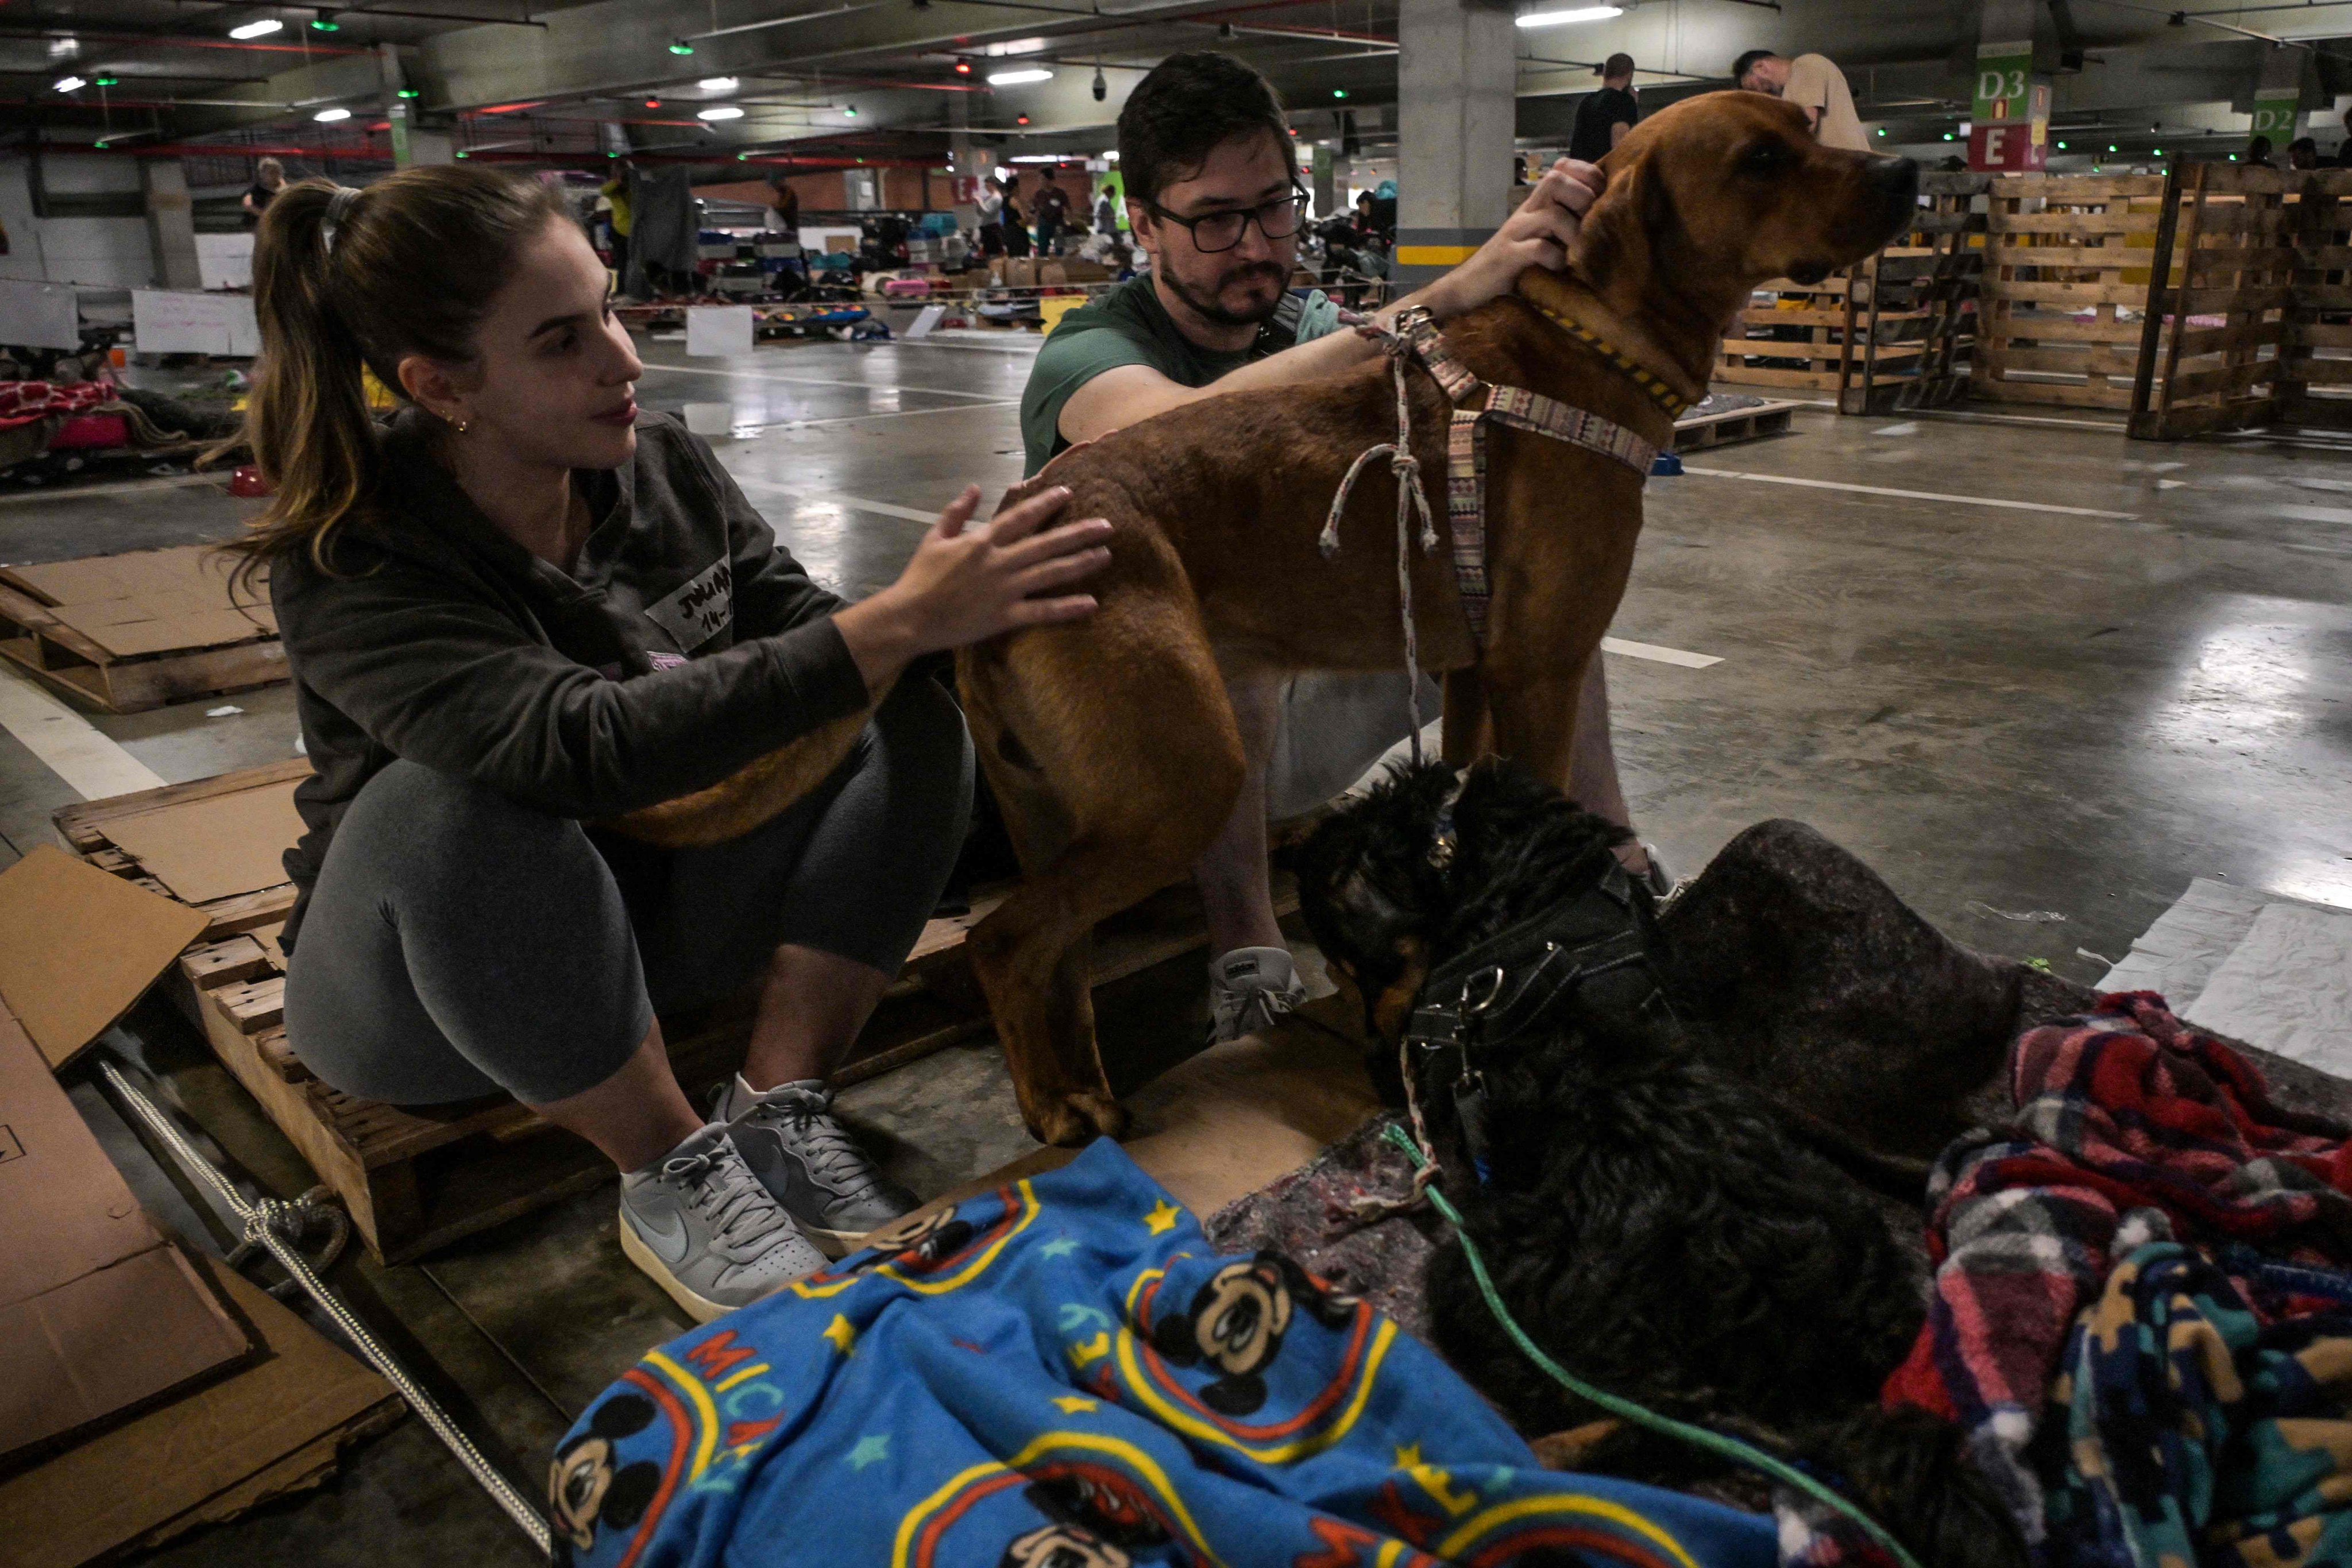 Volunteers take care of dogs at an animal shelter in Brazil. Photo: AFP